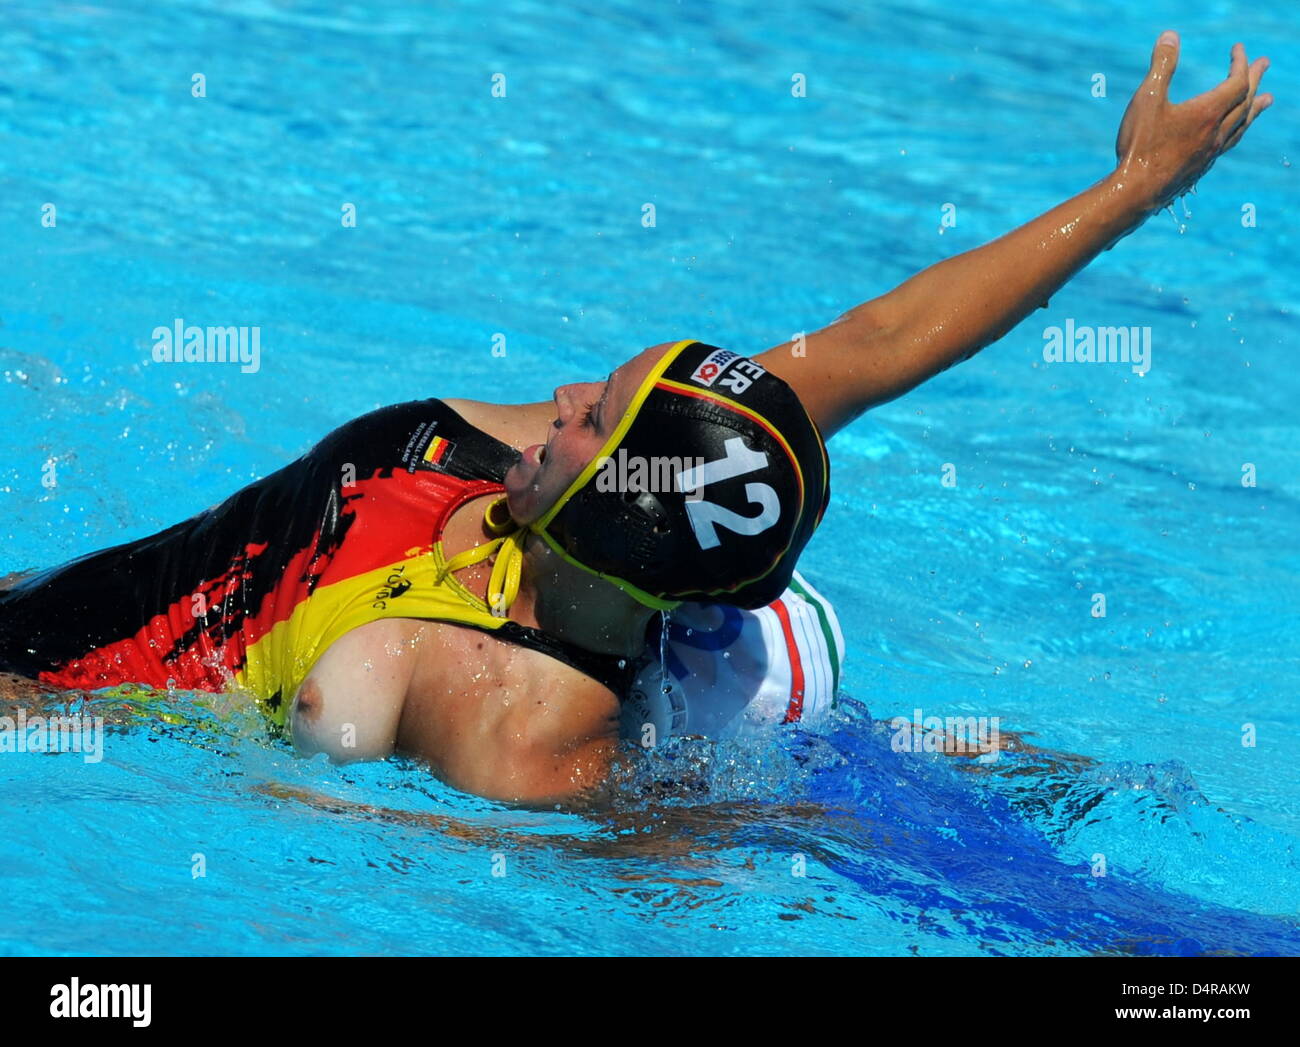 German Mandy Zoellner (L) fights for the ball with Italian Simona Abbate during their water polo place 9 match at the FINA Swimming World Championships in Rome, Italy, 29 July 2009. Italy defeated Germany 12-3, Germany finished 10th. Photo: MARCUS BRANDT Stock Photo